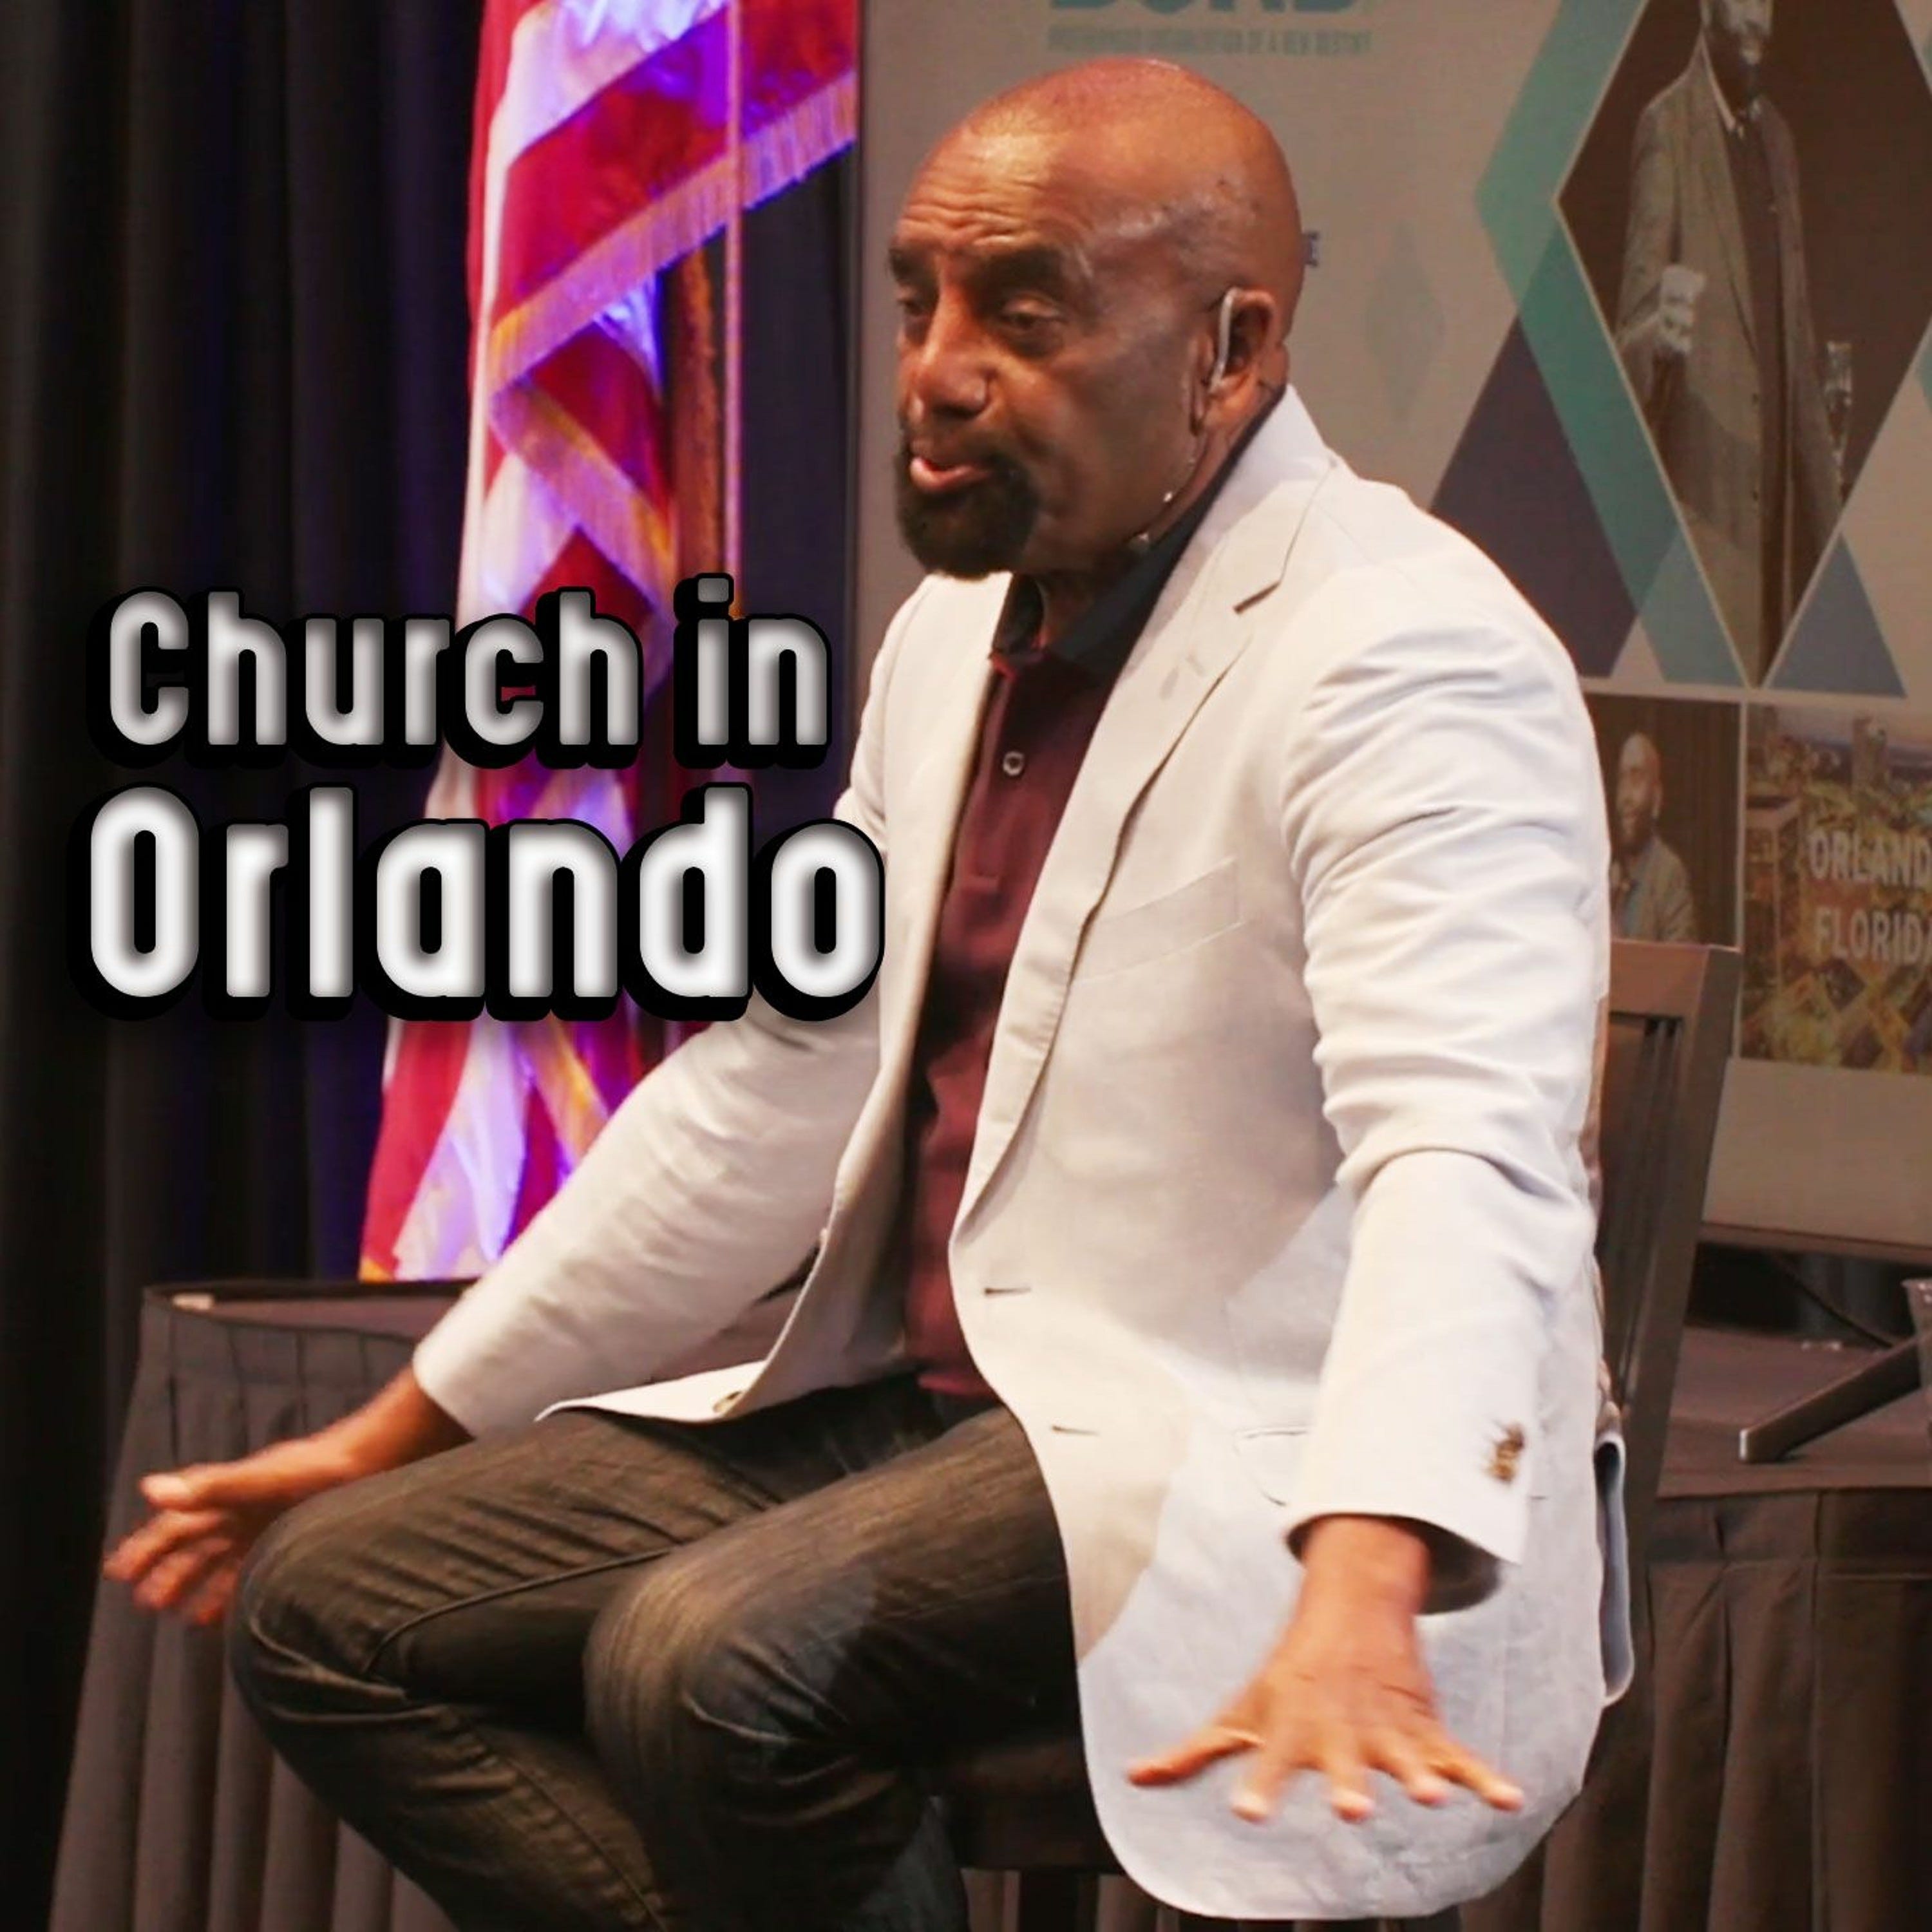 08/15/21 Church in Orlando, Florida (After Men's Conference)